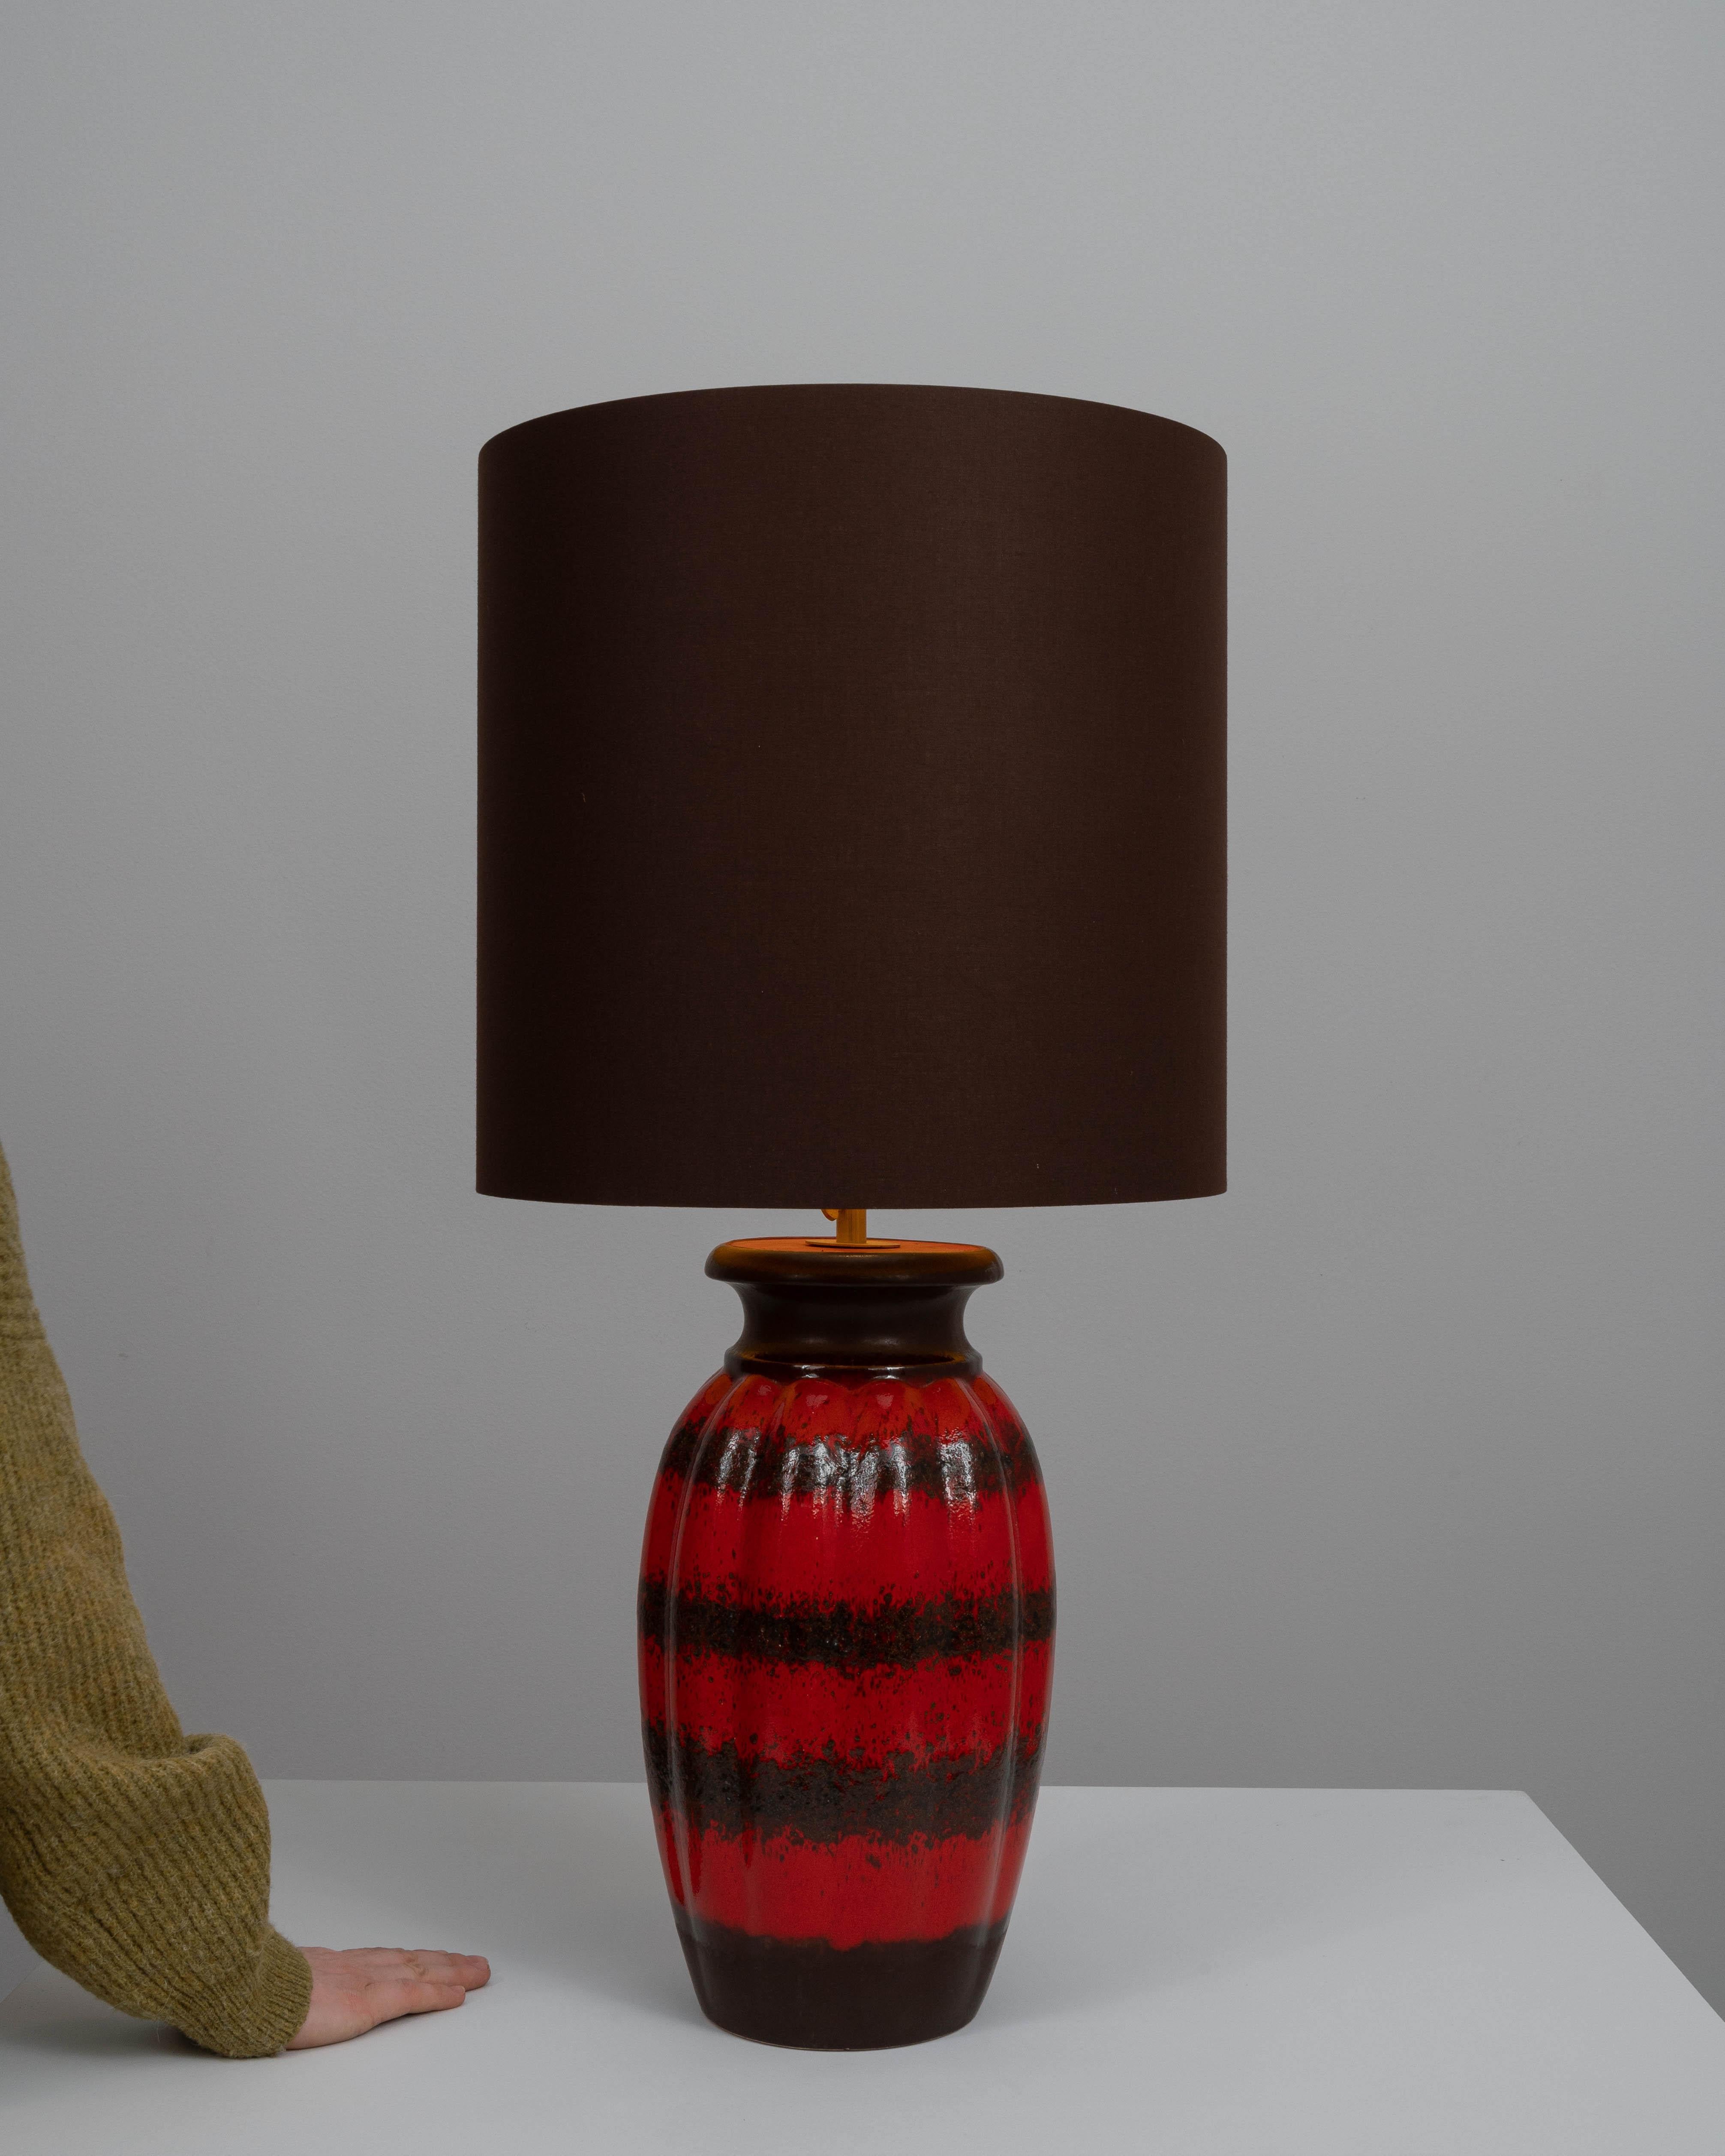 20th Century German Ceramic Table Lamp In Good Condition For Sale In High Point, NC